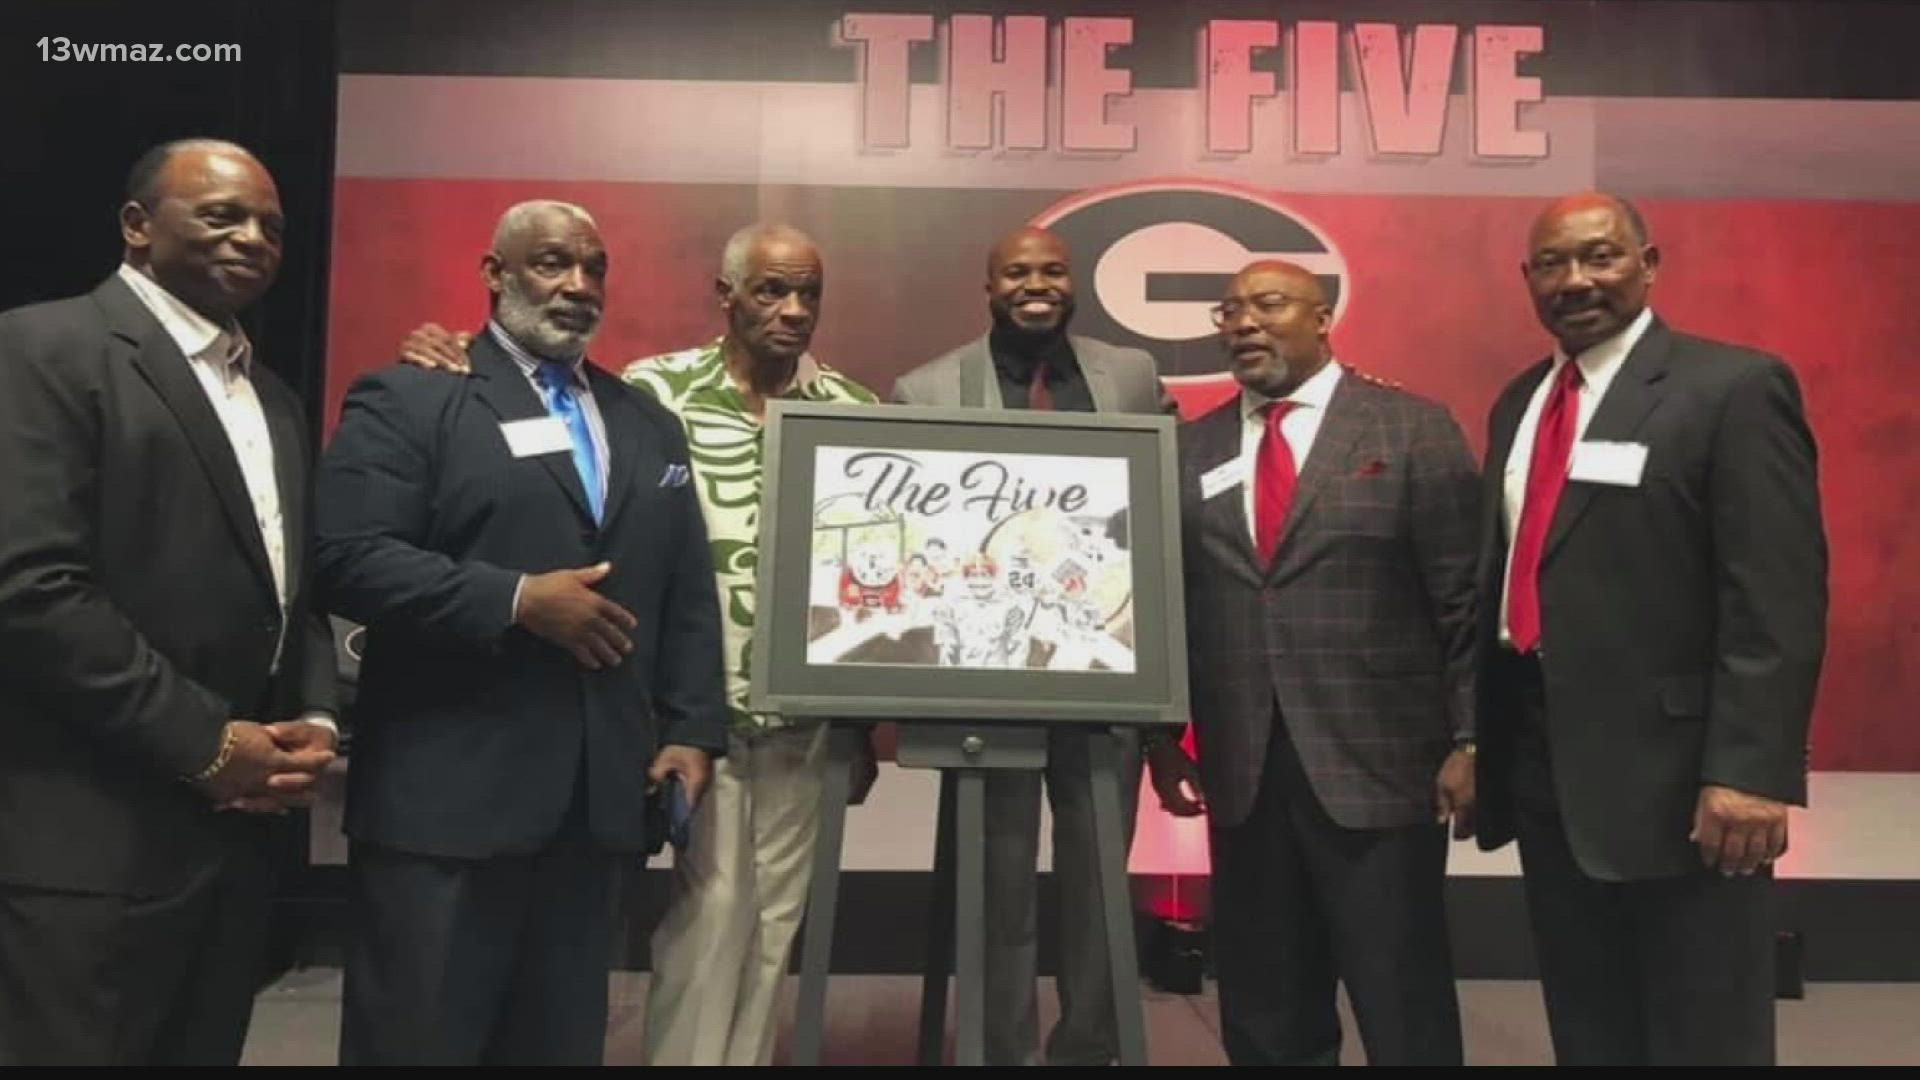 Known as “The Five,” they became the first African-American players to earn football scholarships to UGA in 1971.